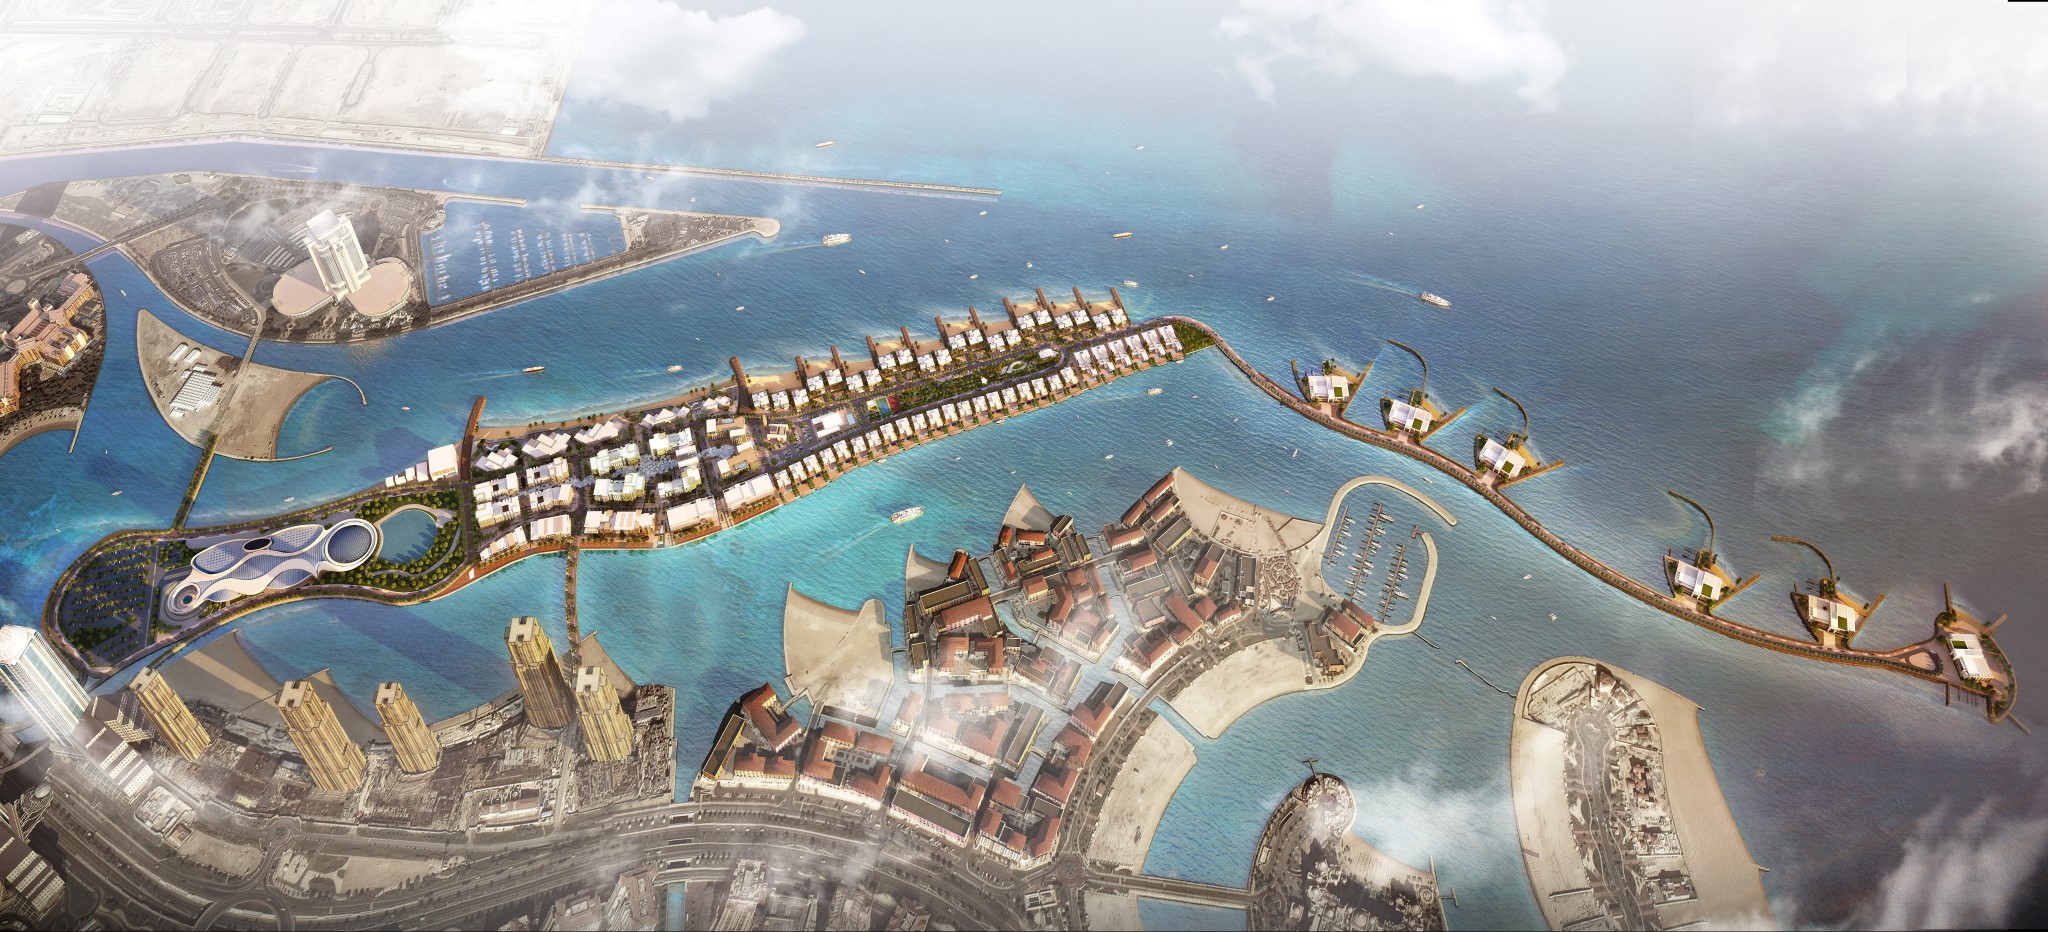 Five real estate projects are set to make Qatar look like the future